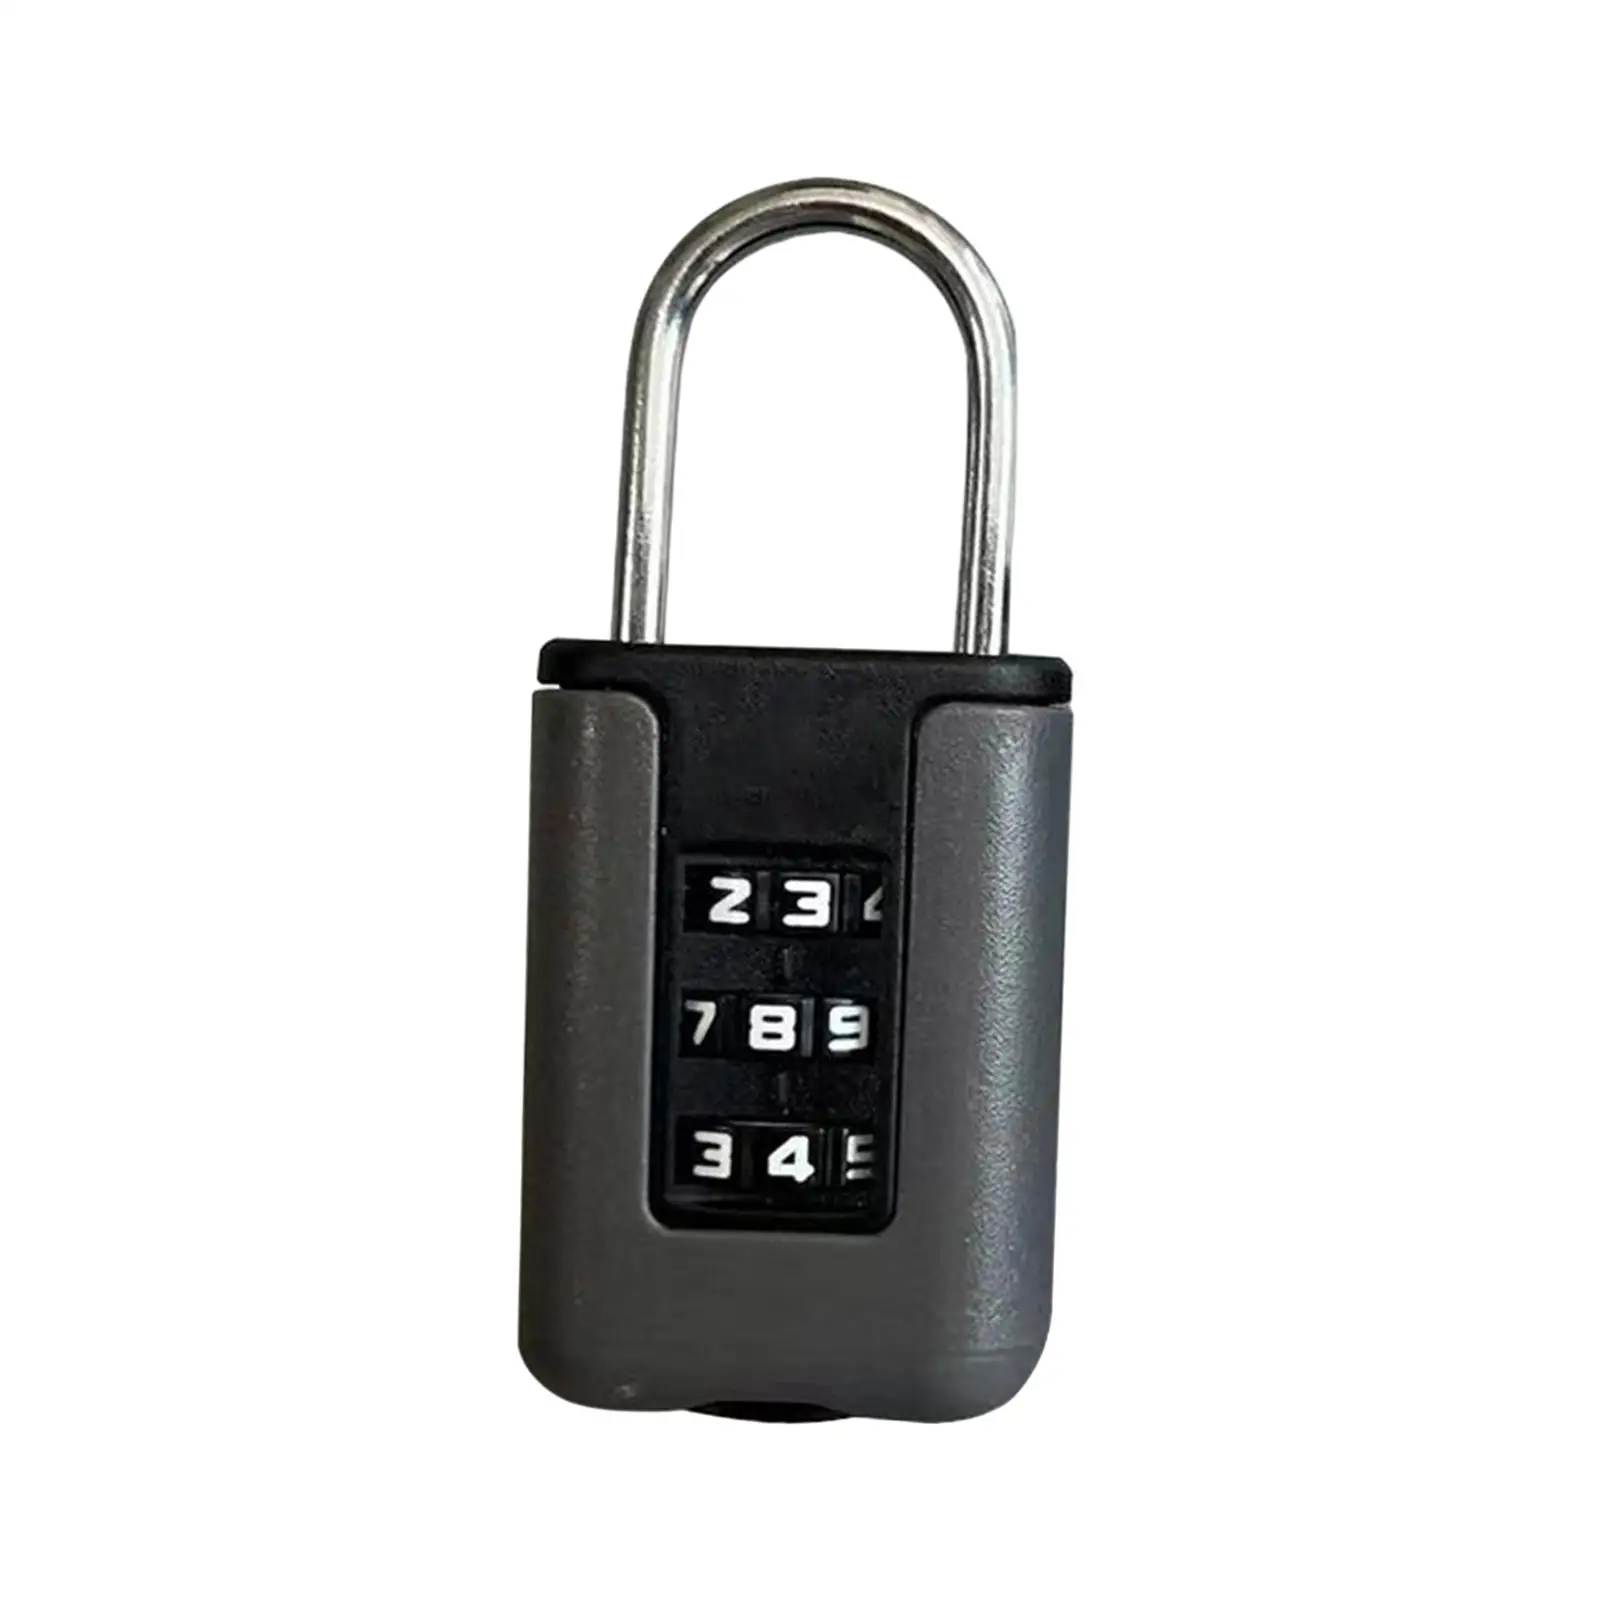 3 Digit Combination Lock Anti Luggage Password Lock Code Lock for Gym Bags Backpack Outdoor Travel Cabinet Storage Toolbox